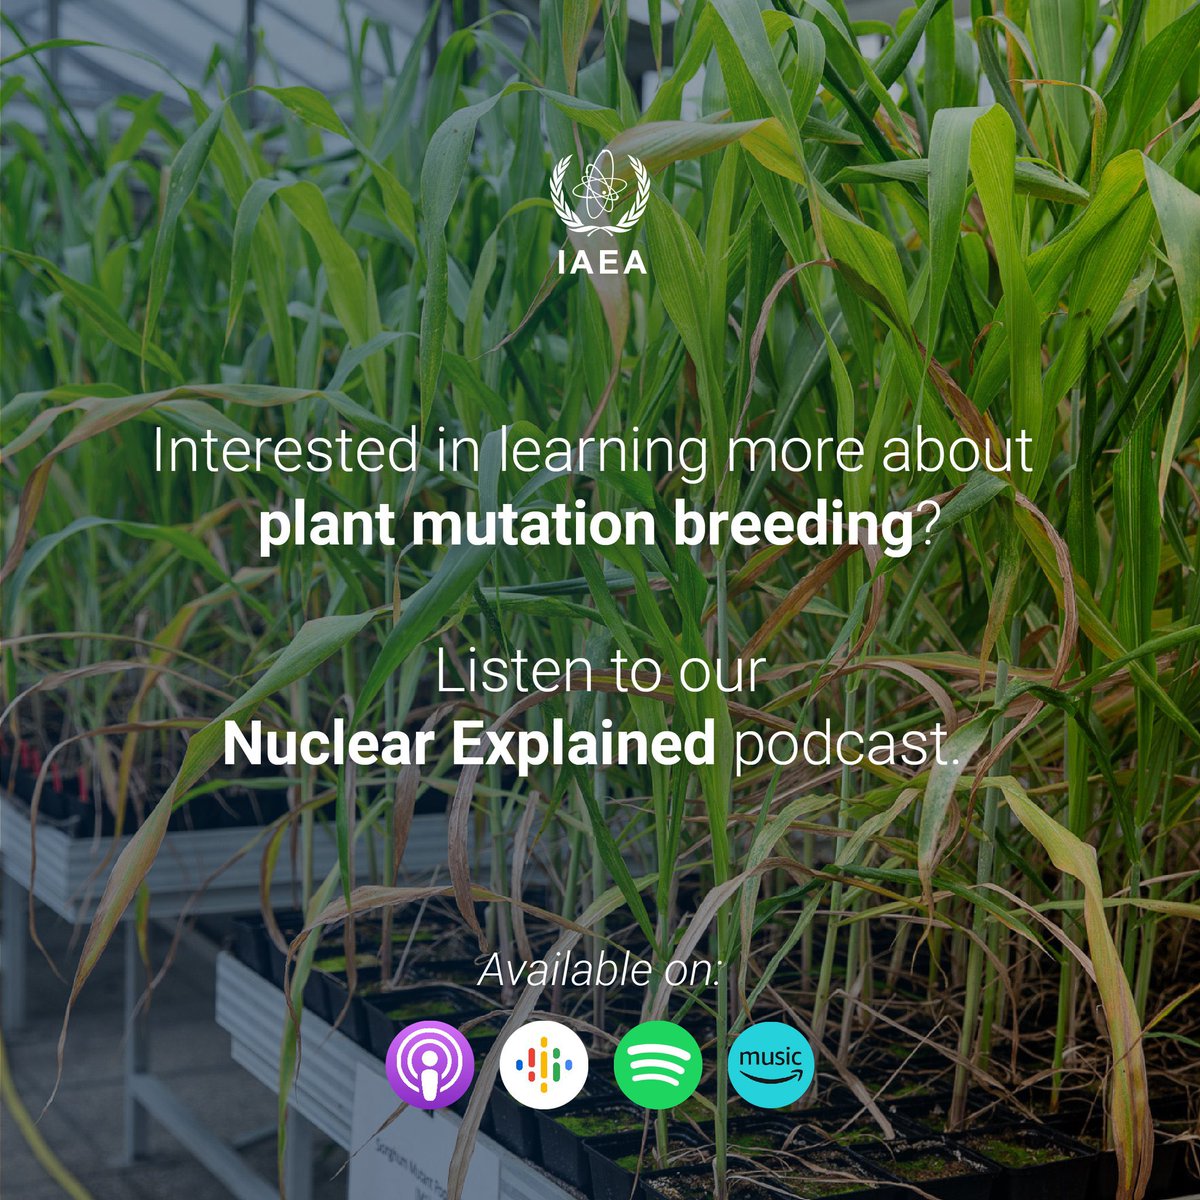 🤔 Curious to learn how the #SeedsInSpace project aims to develop crops against the ravages of #ClimateChange on 🌍?

🎧 Listen to our new #NuclearExplained podcast 👉 iaea.org/podcasts/chann…

#Atoms4Climate #ZeroHunger @FAO @NASA @IAEANA